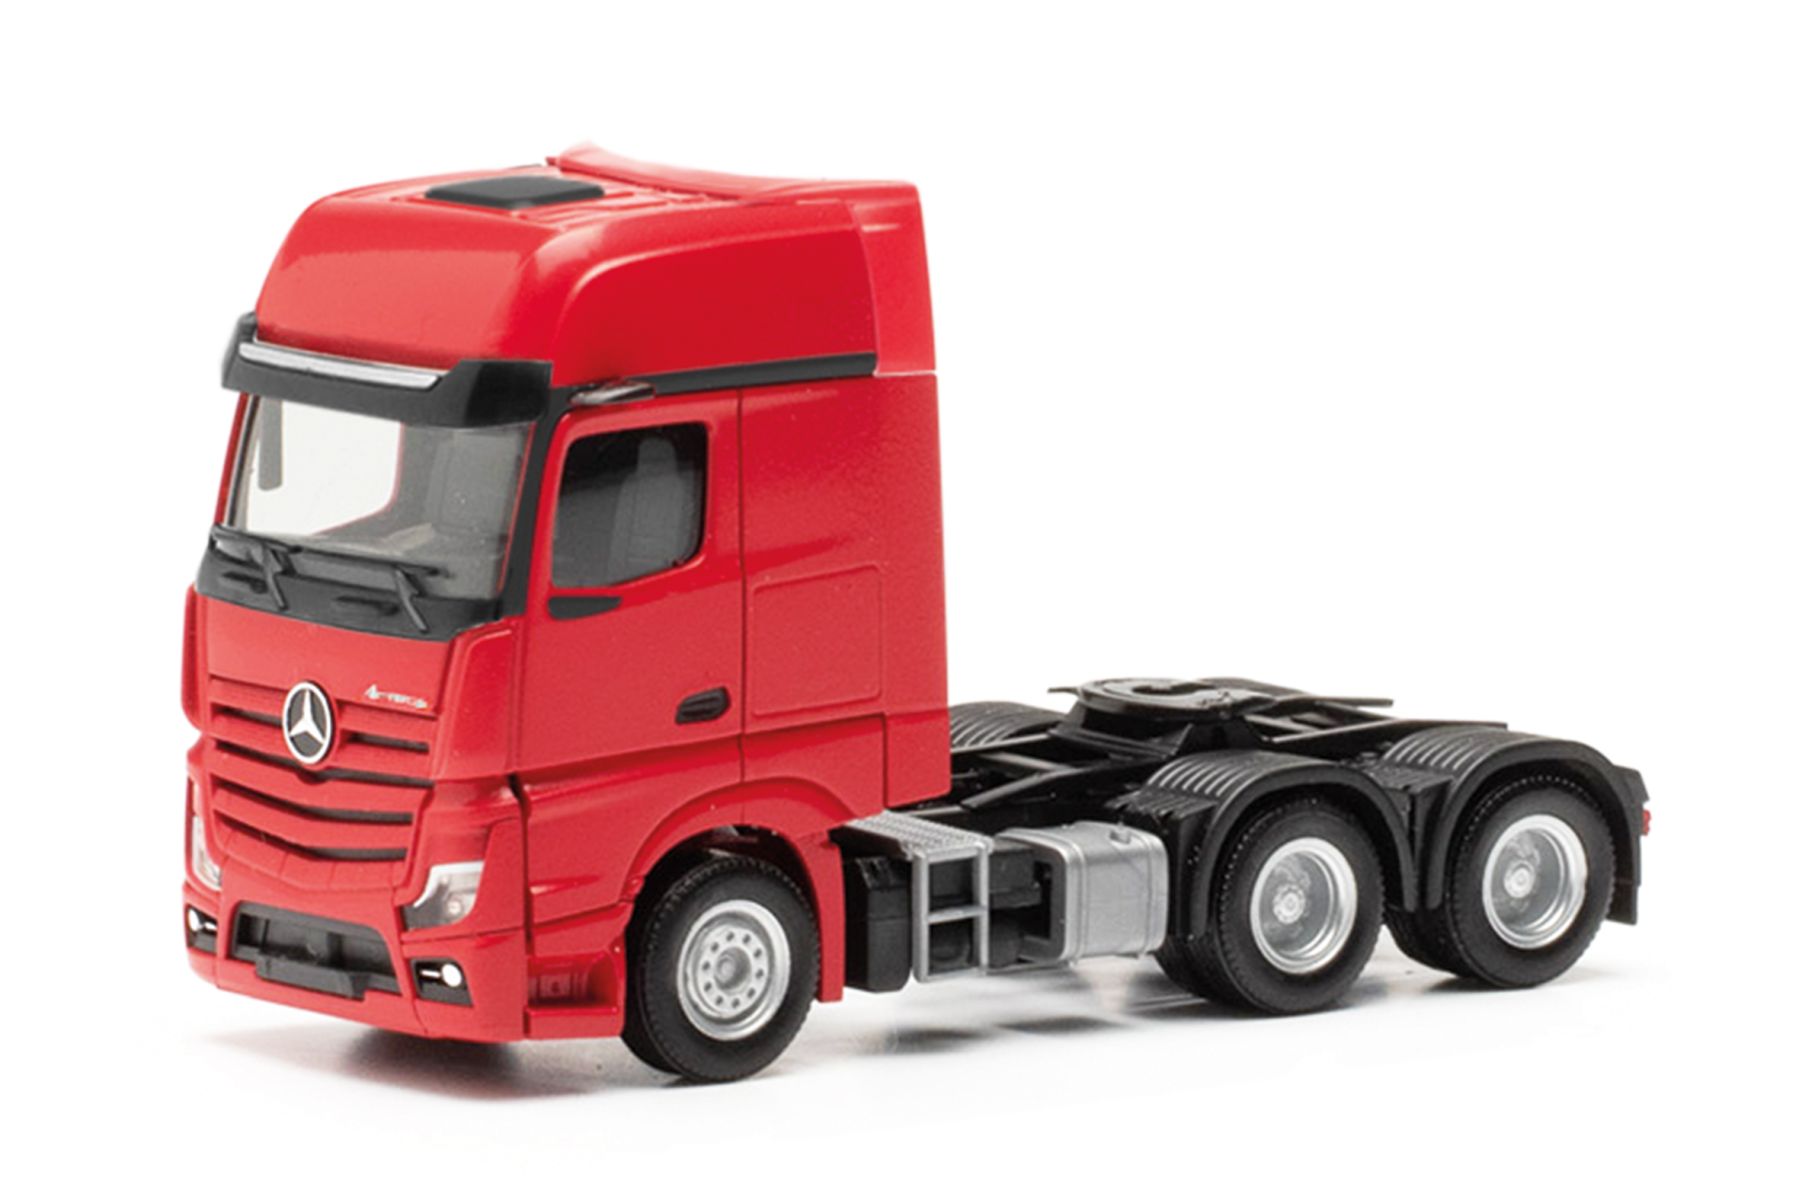 Herpa 317917 - Mercedes-Benz Actros L Gigaspace Solozugmaschine 3achs (6x4), rot